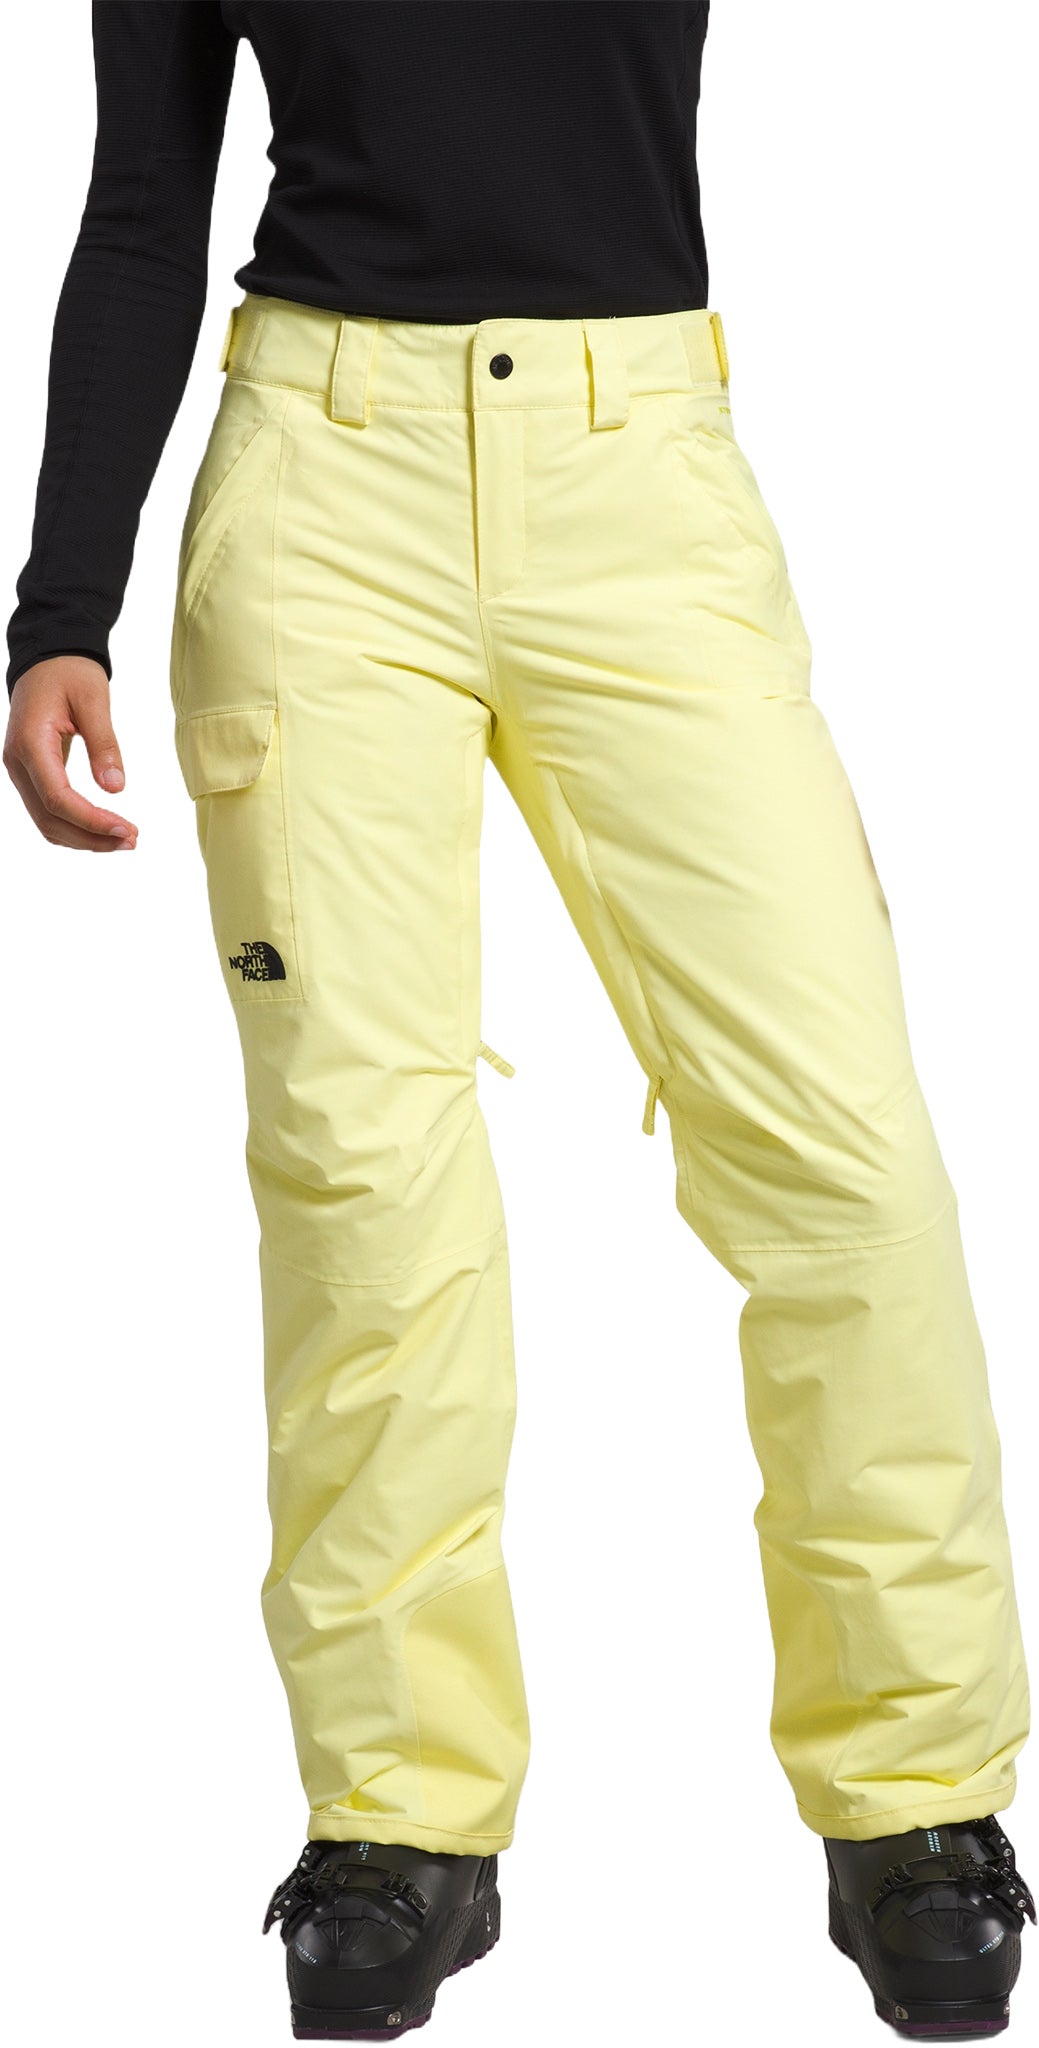 The North Face Freedom Insulated Pant Women's- Topaz